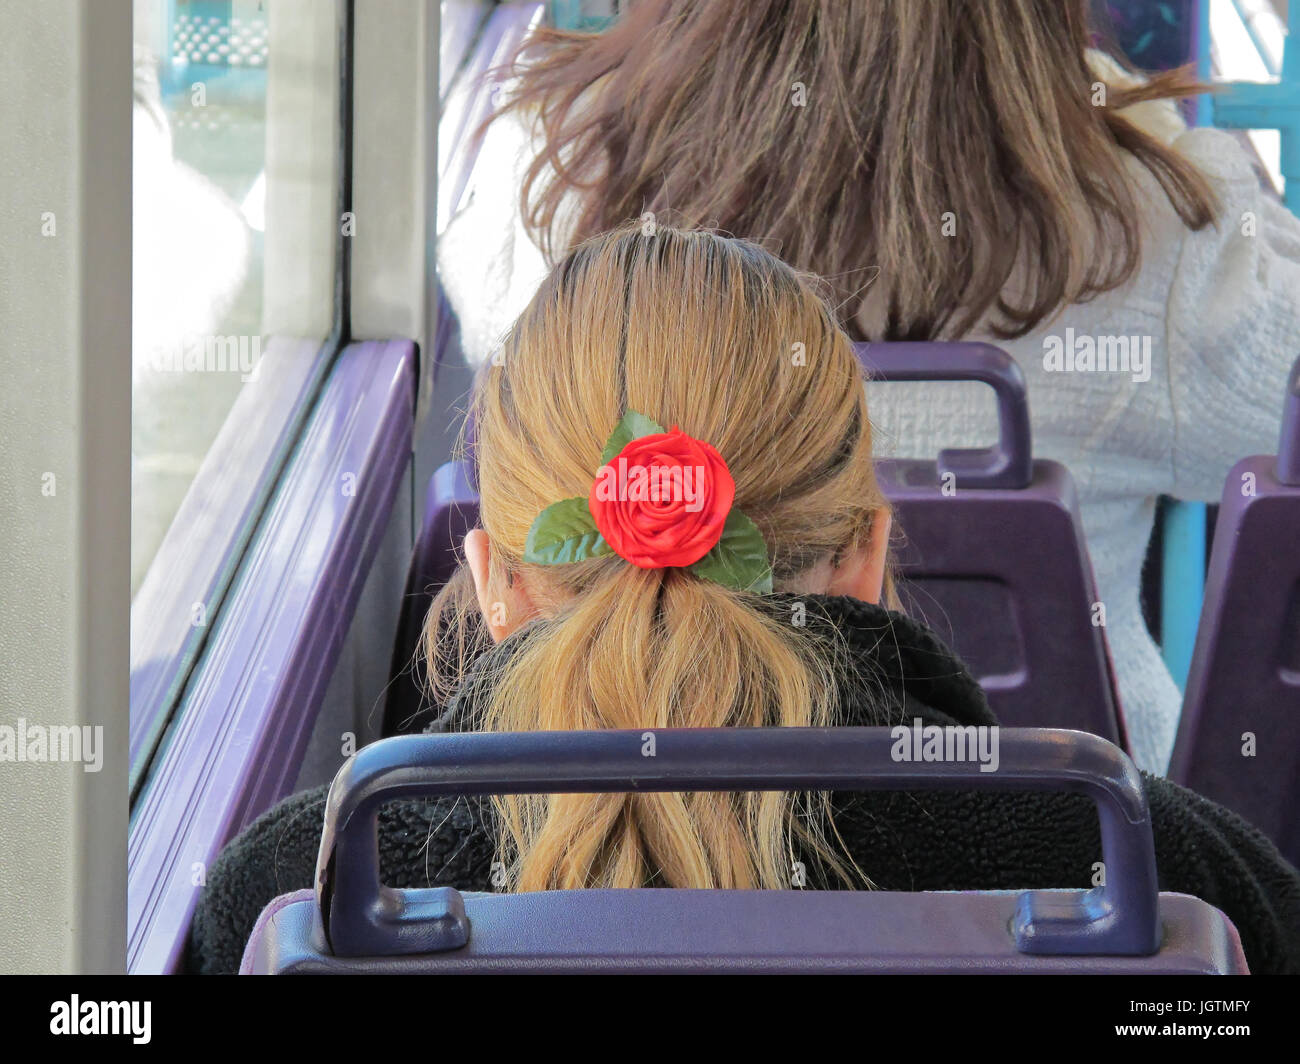 the back of the head with a rose hairband blonde hair girl woman empty bus public transport seats Stock Photo